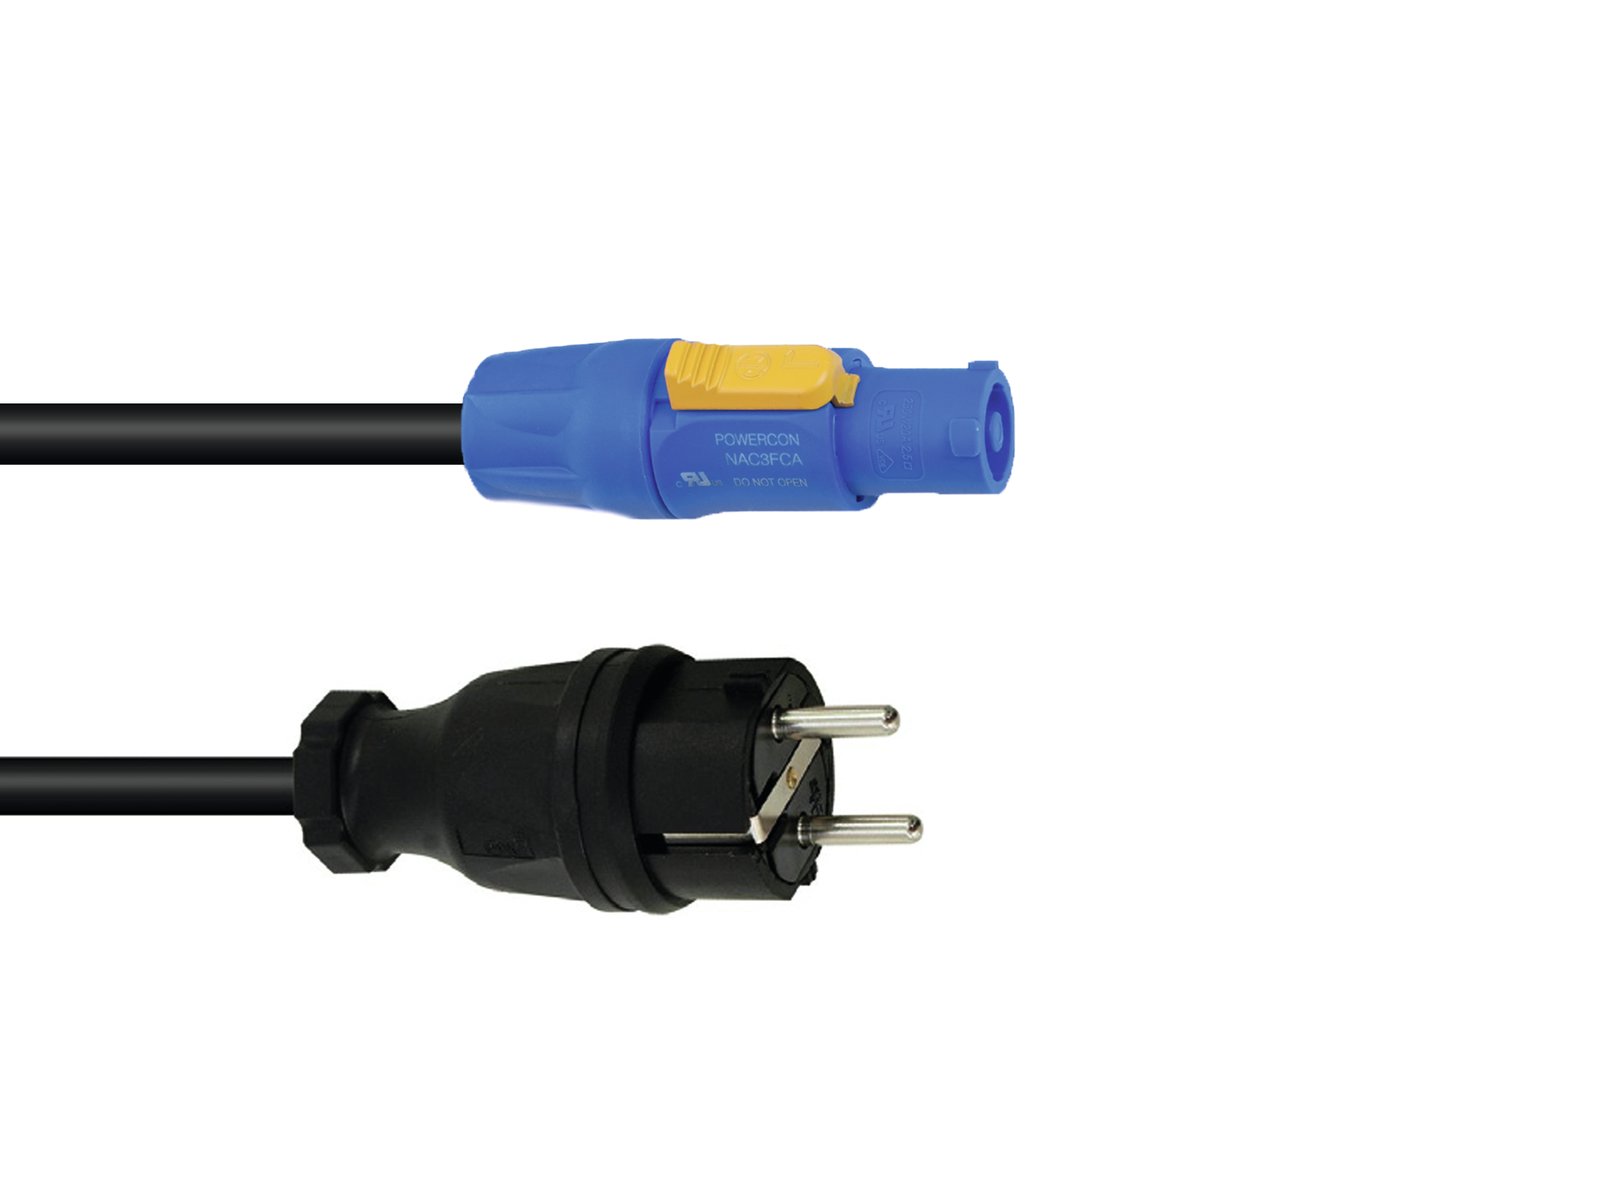 PSSO PowerCon Power Cable 3×2.5 5m H07RN-F